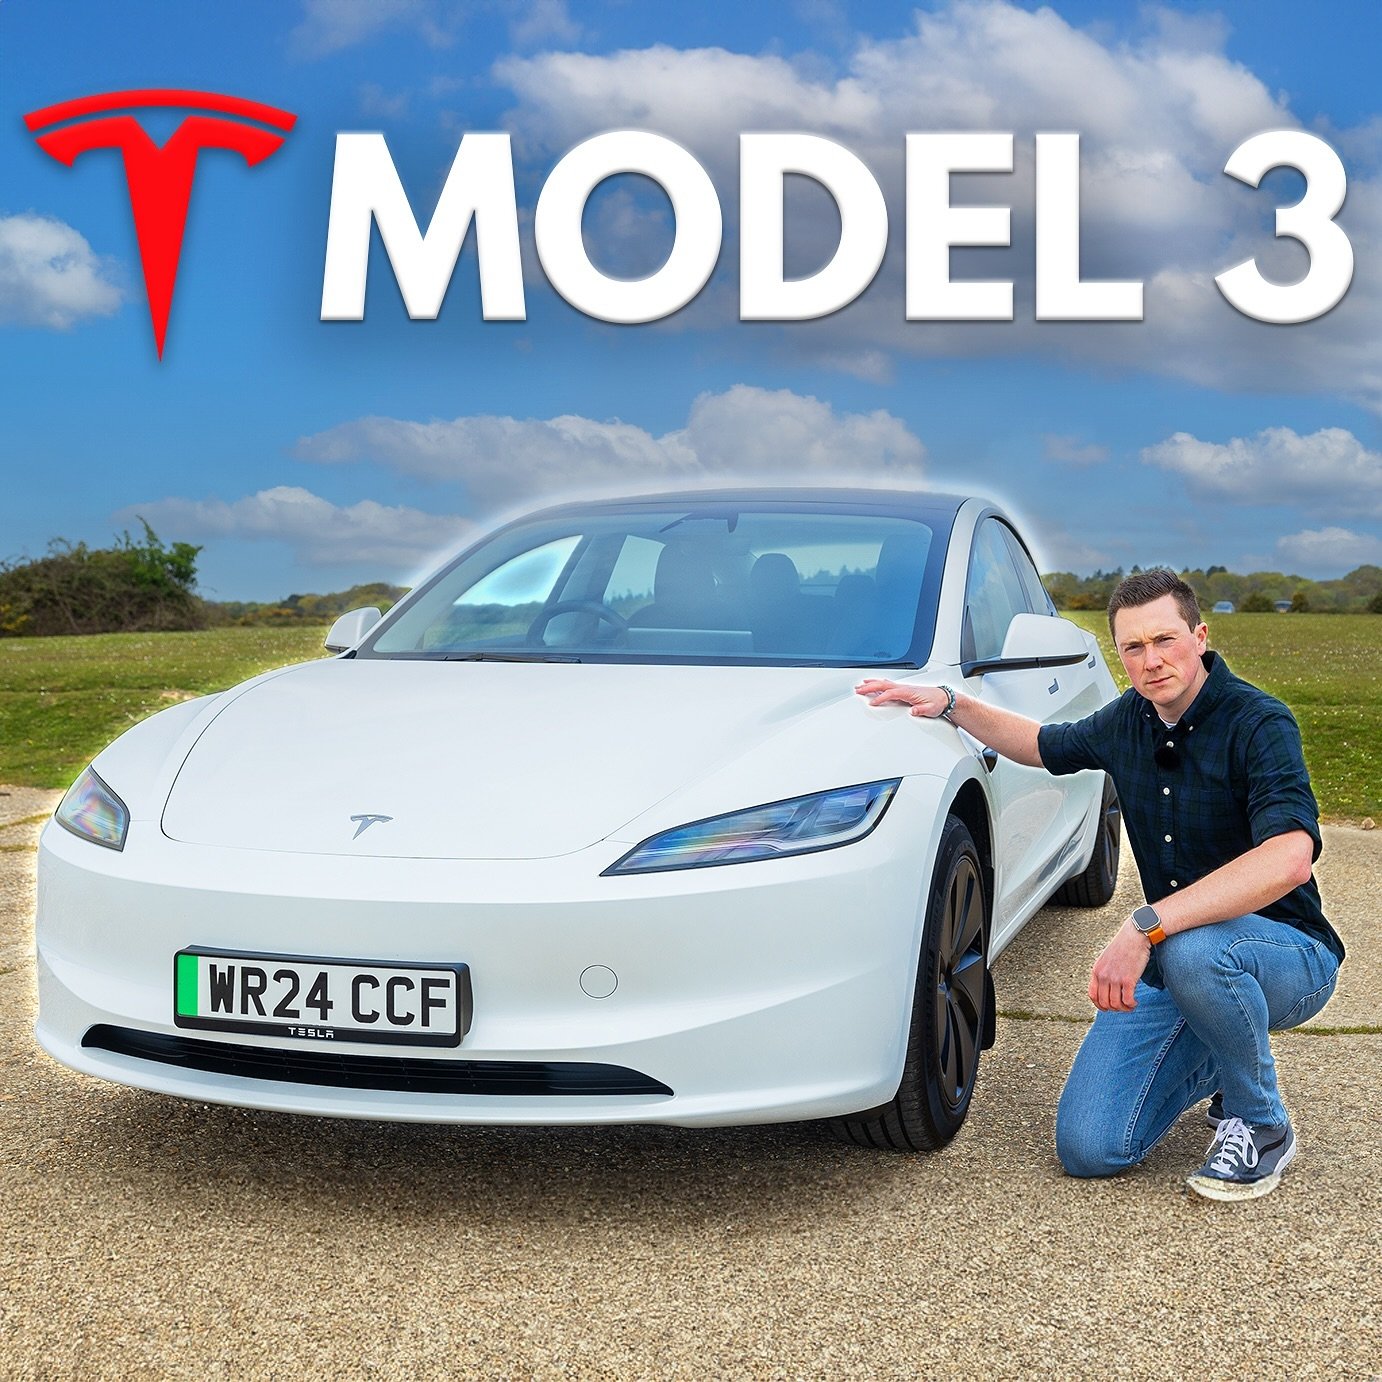 I got to try out the new Tesla Model 3 for a week and they&rsquo;ve made some drastic changes! Not only is it extremely quiet on the inside but they&rsquo;ve also taken the minimalistic approach even further now with their interior!

Check out my lat